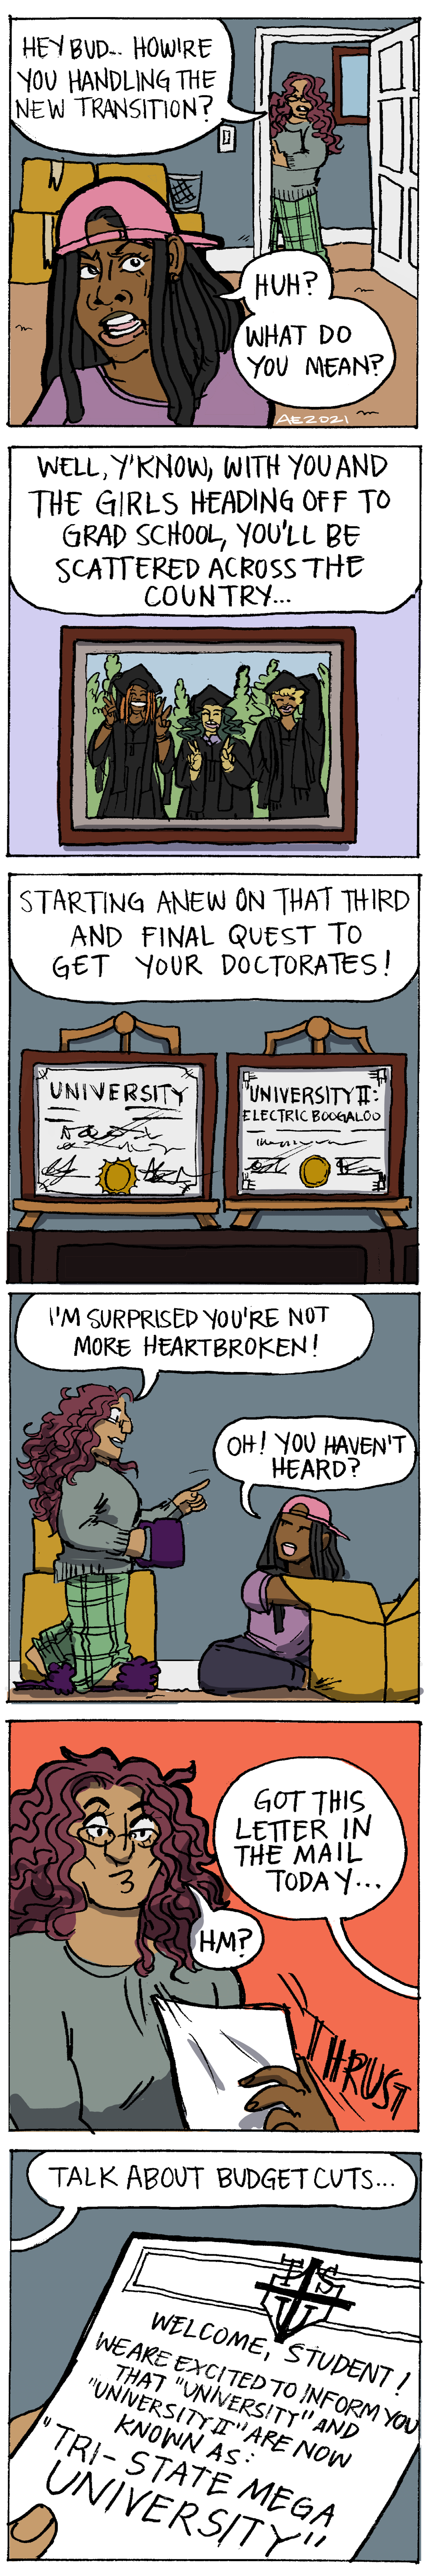 An editorial cartoon about students going to college realizing their college has been consolidated with another.